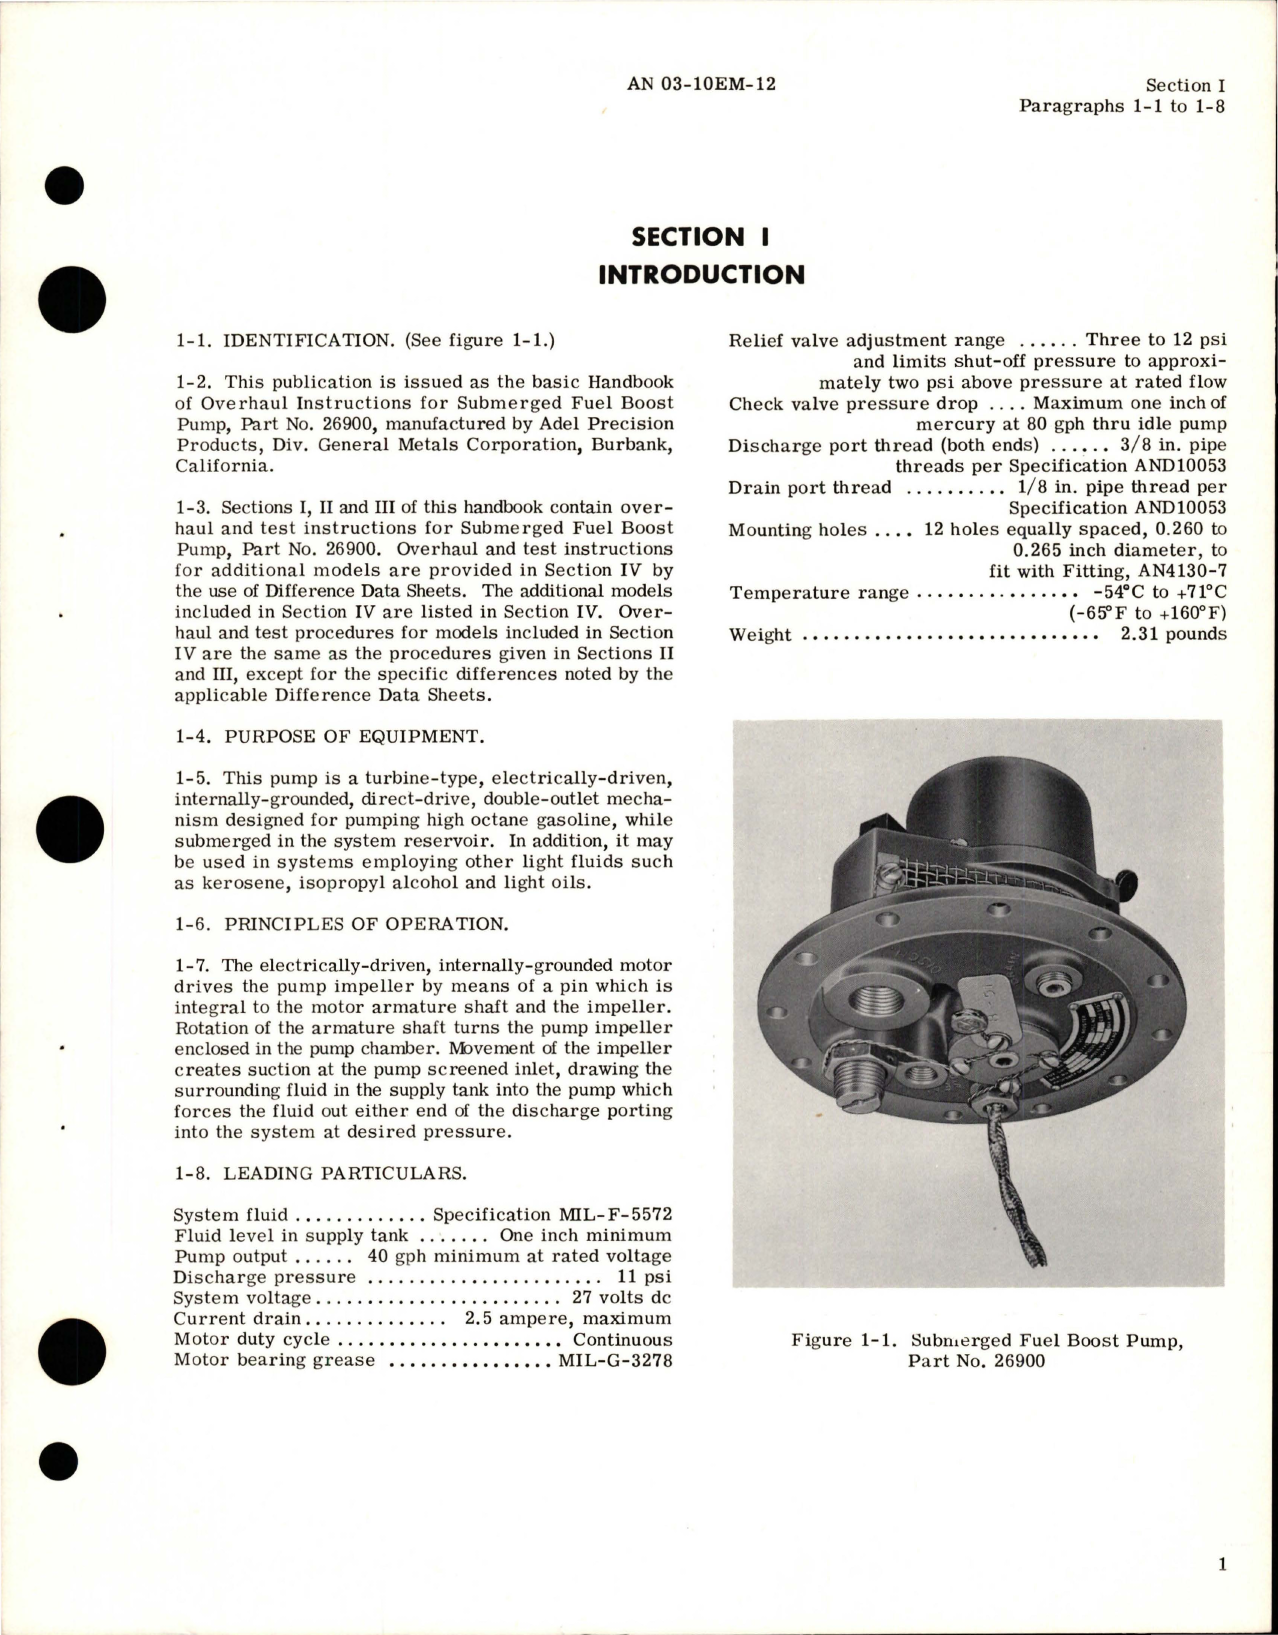 Sample page 5 from AirCorps Library document: Overhaul Instructions for Submerged Fuel Boost Pump